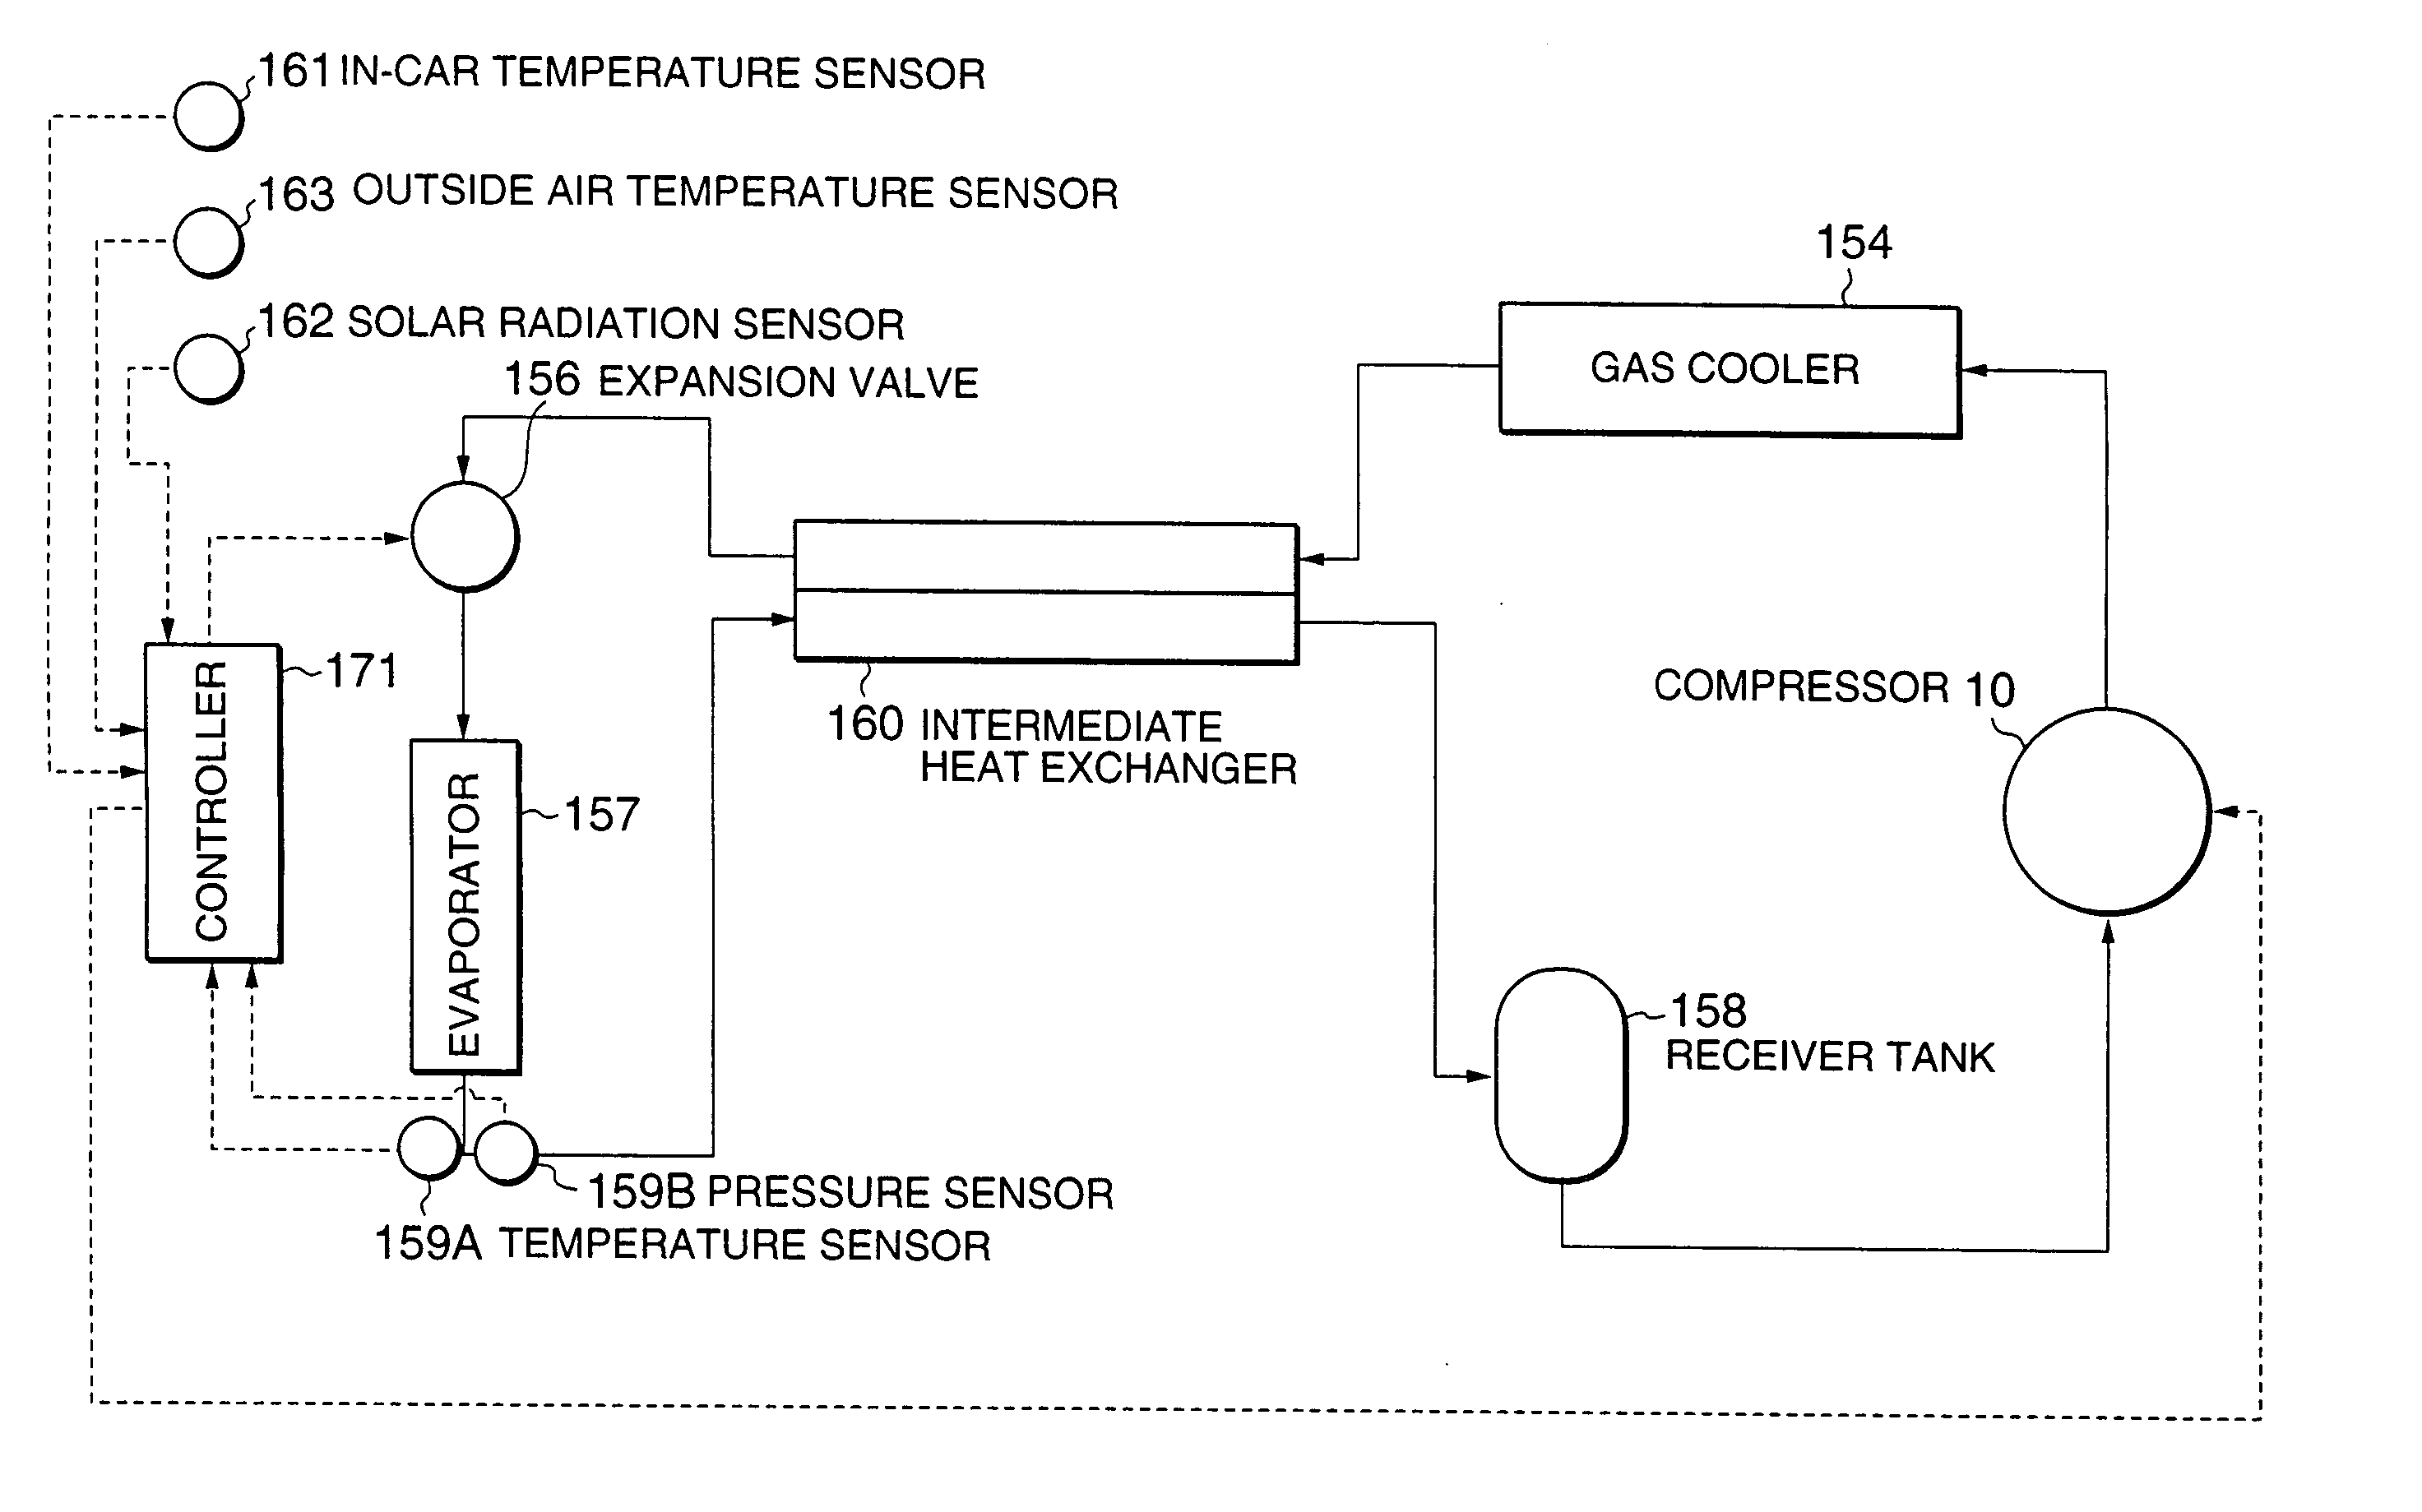 Supercritical refrigerant cycle system